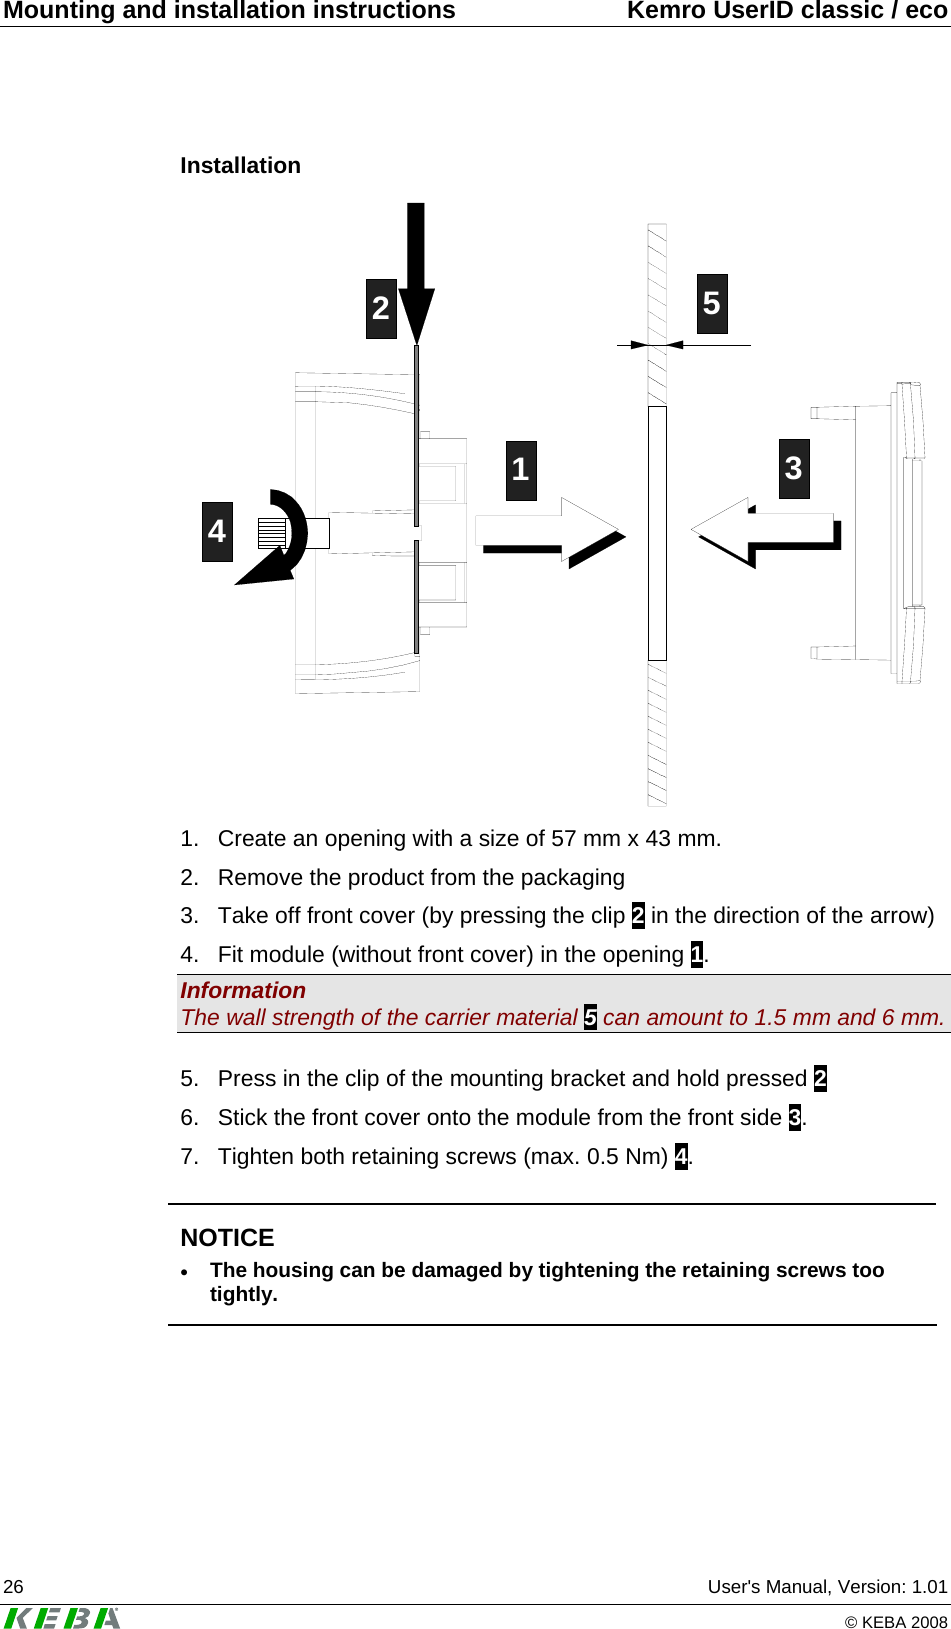 Mounting and installation instructions  Kemro UserID classic / eco 26  User&apos;s Manual, Version: 1.01   © KEBA 2008 Installation 12435 1.  Create an opening with a size of 57 mm x 43 mm. 2.  Remove the product from the packaging 3.  Take off front cover (by pressing the clip 2 in the direction of the arrow) 4.  Fit module (without front cover) in the opening 1. Information The wall strength of the carrier material 5 can amount to 1.5 mm and 6 mm.  5.  Press in the clip of the mounting bracket and hold pressed 2 6.  Stick the front cover onto the module from the front side 3. 7.  Tighten both retaining screws (max. 0.5 Nm) 4.   NOTICE • The housing can be damaged by tightening the retaining screws too tightly.   